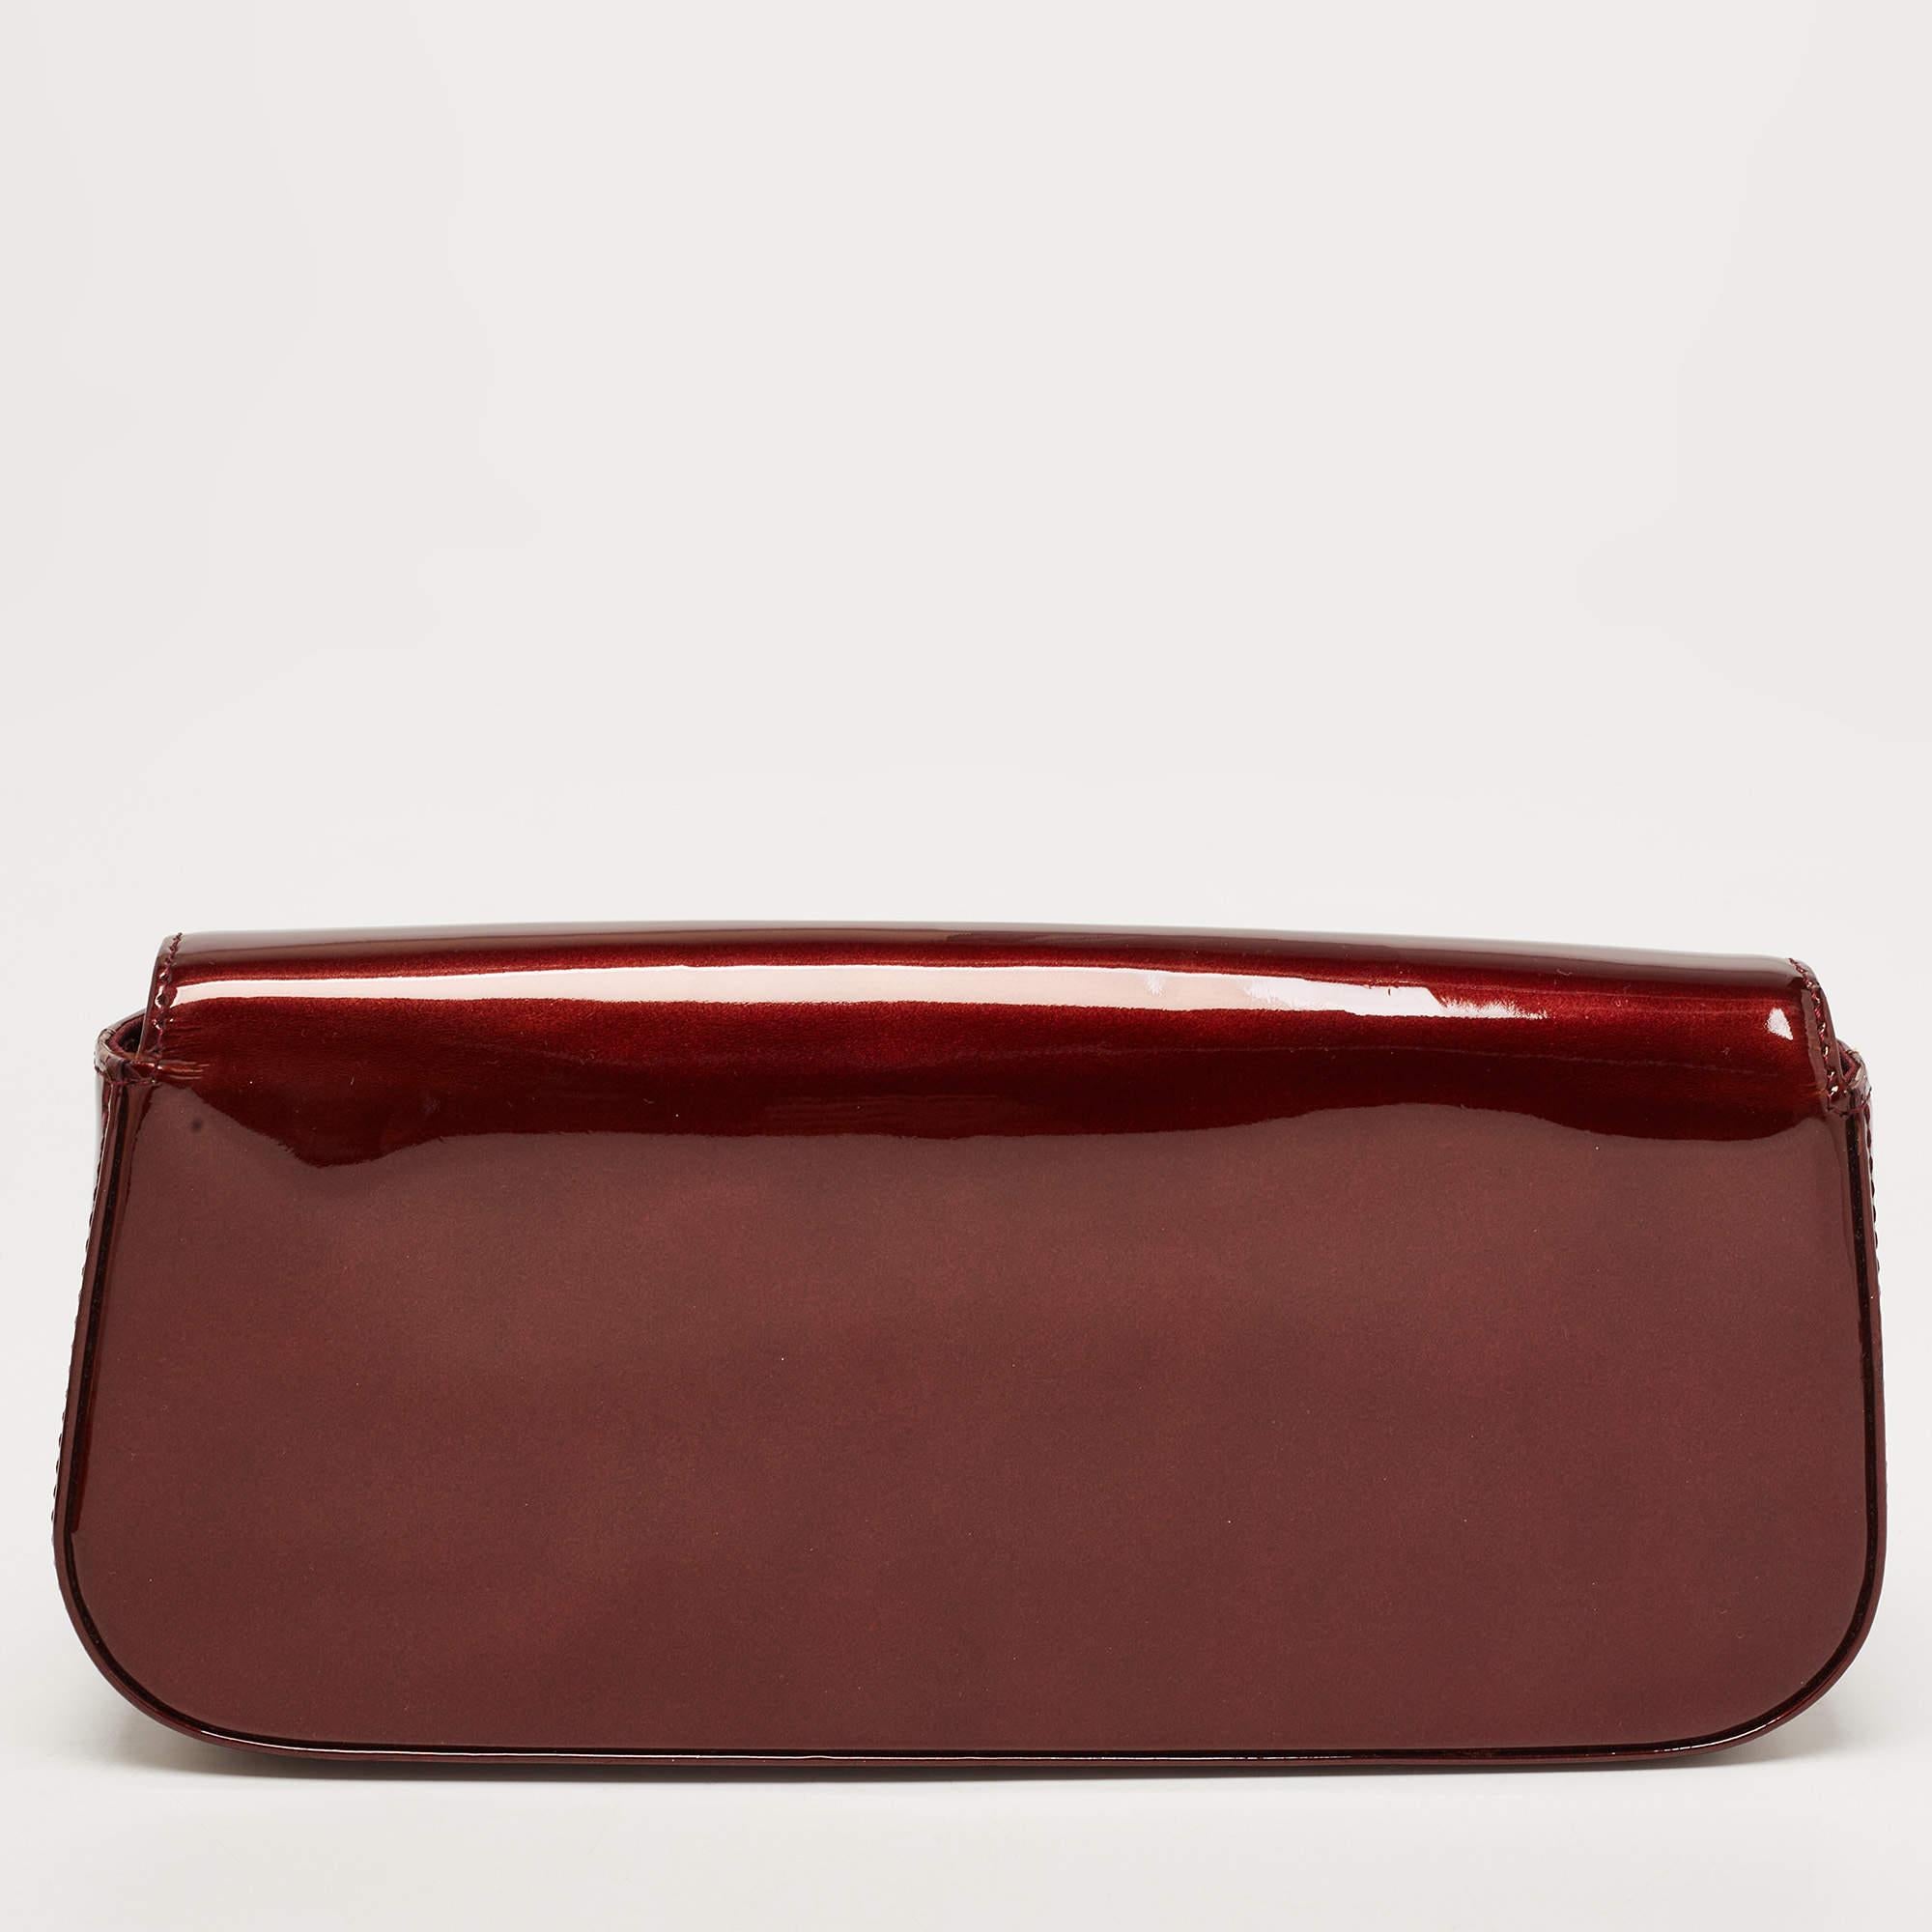 This exquisite Sobe clutch from Louis Vuitton comes in the brand's signature Vernis finish and has a simple design. The brand's logo is beautifully displayed on the flap which opens to a fabric-lined interior that can house all your evening